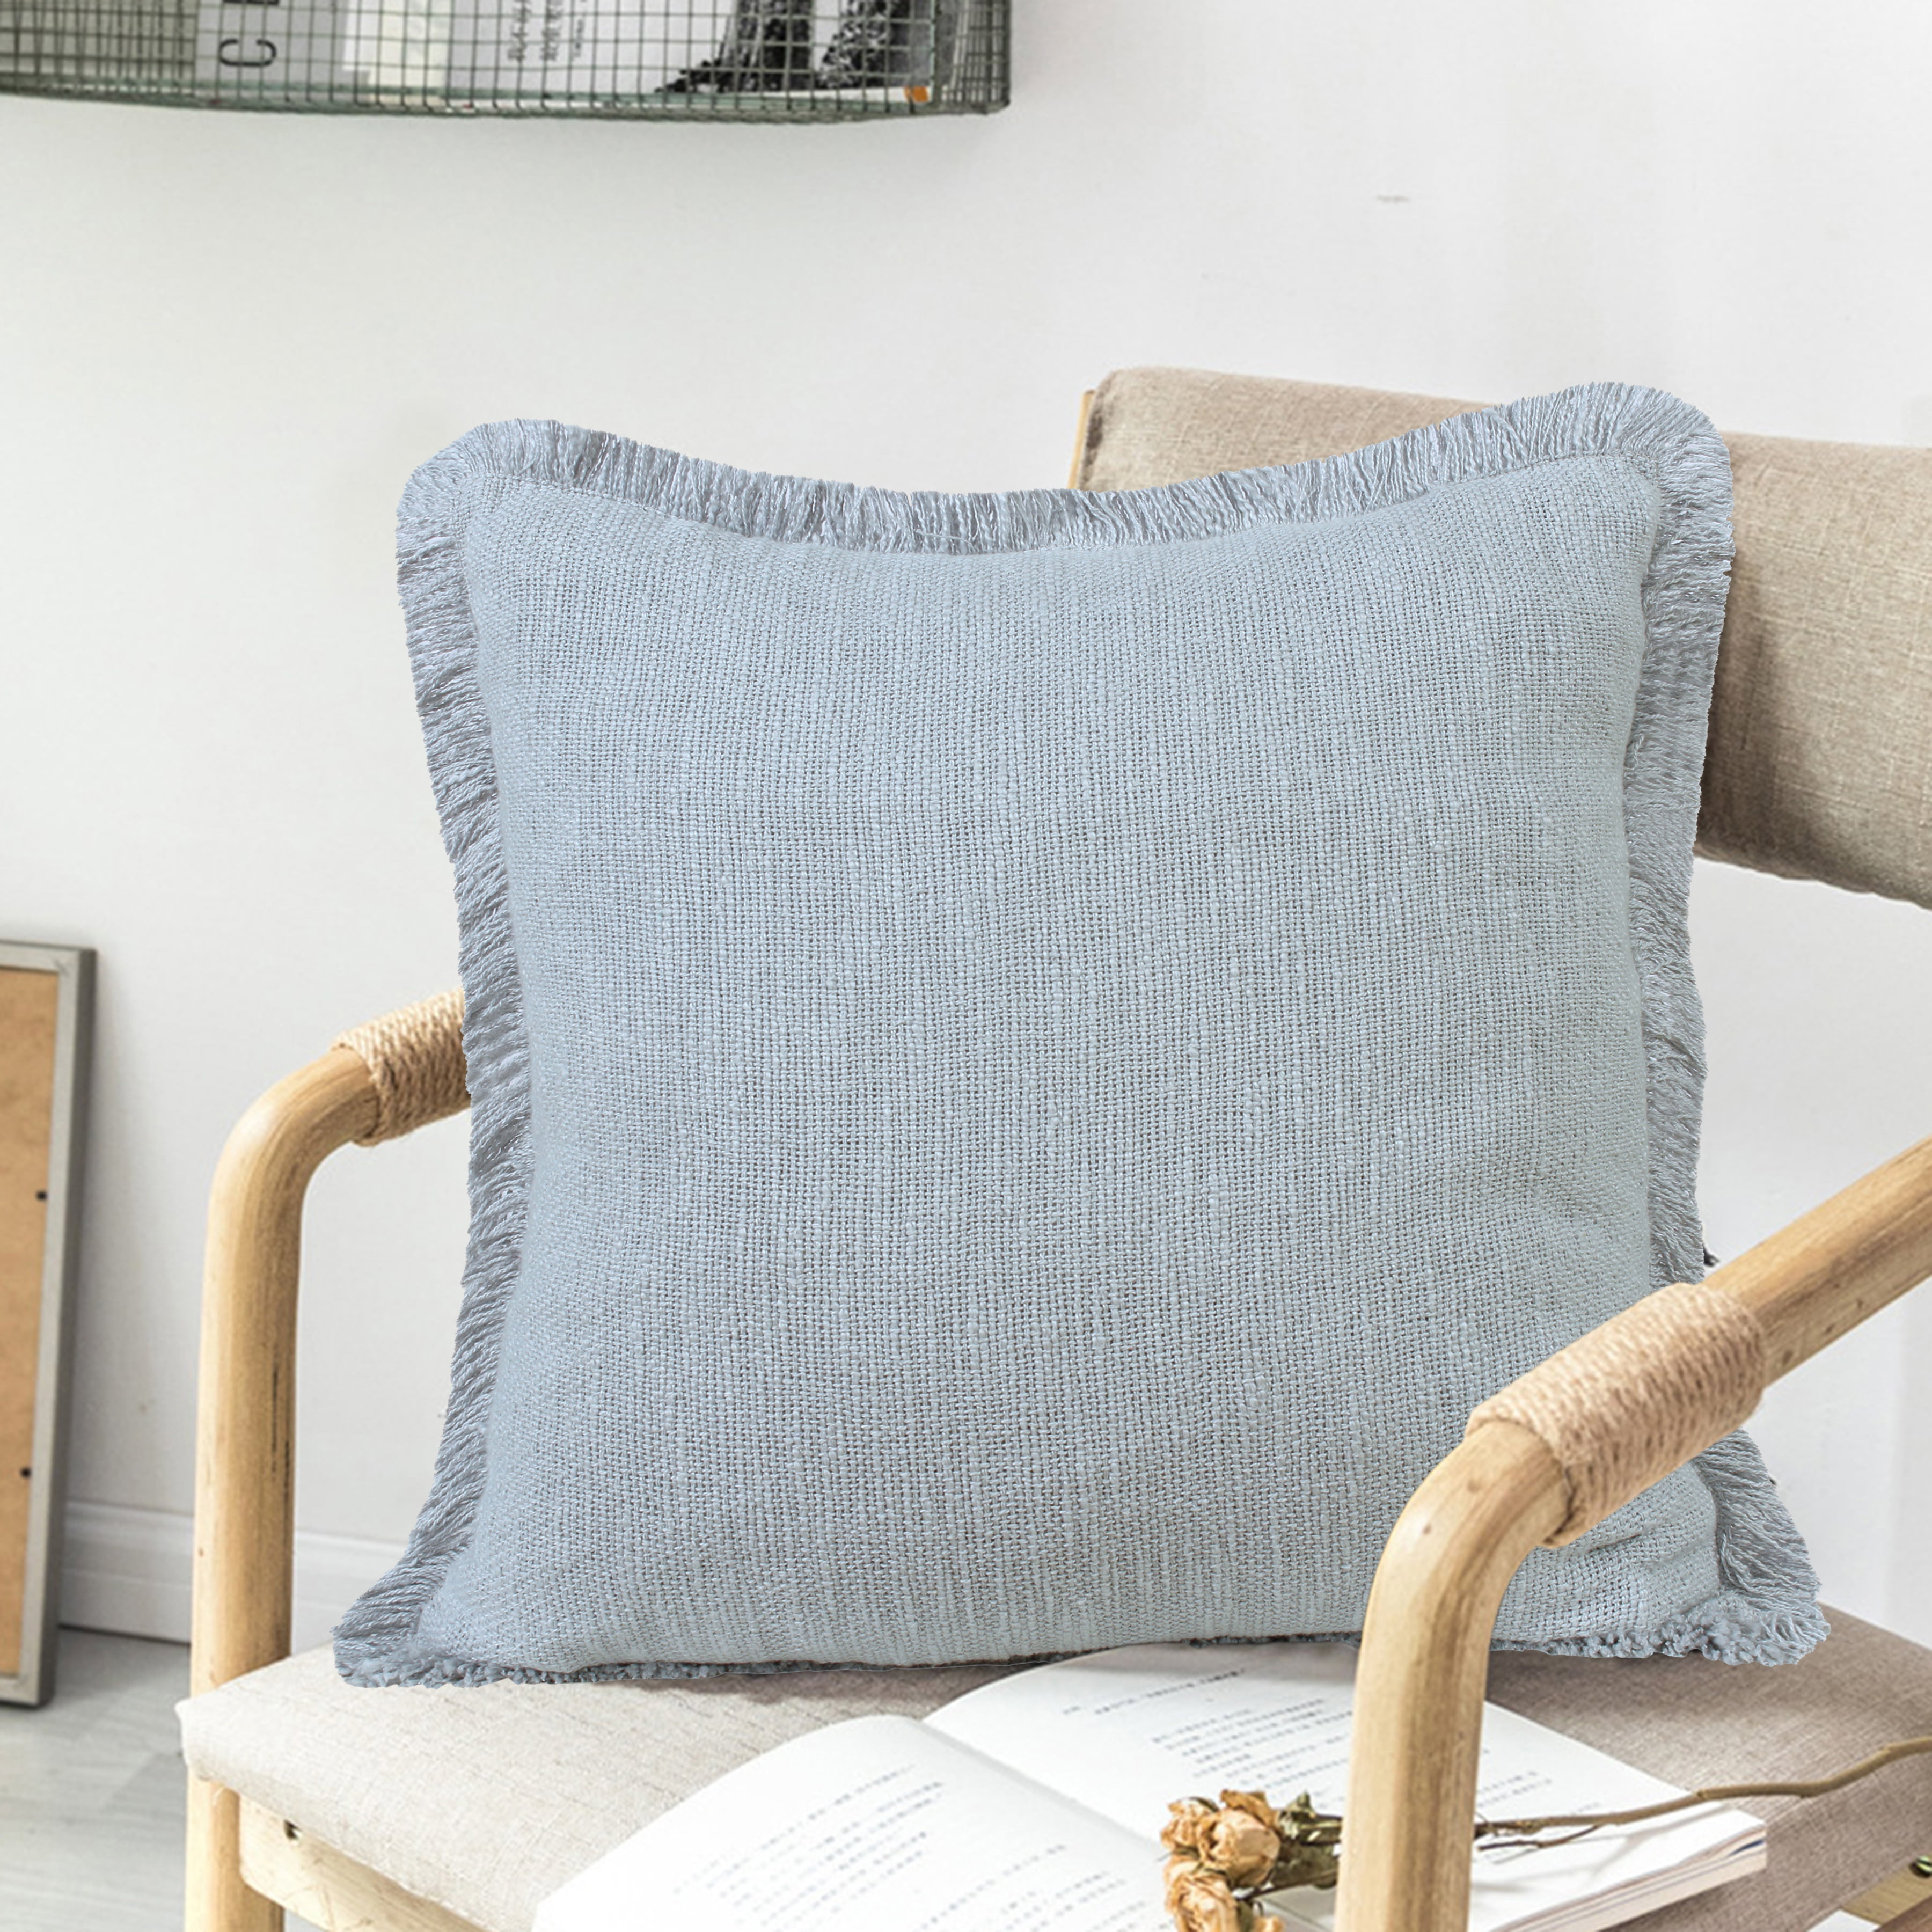 Unique Couch Throw Pillows | Organic Saturation's Teal Love Anchor Nautical  - DiaNoche Designs